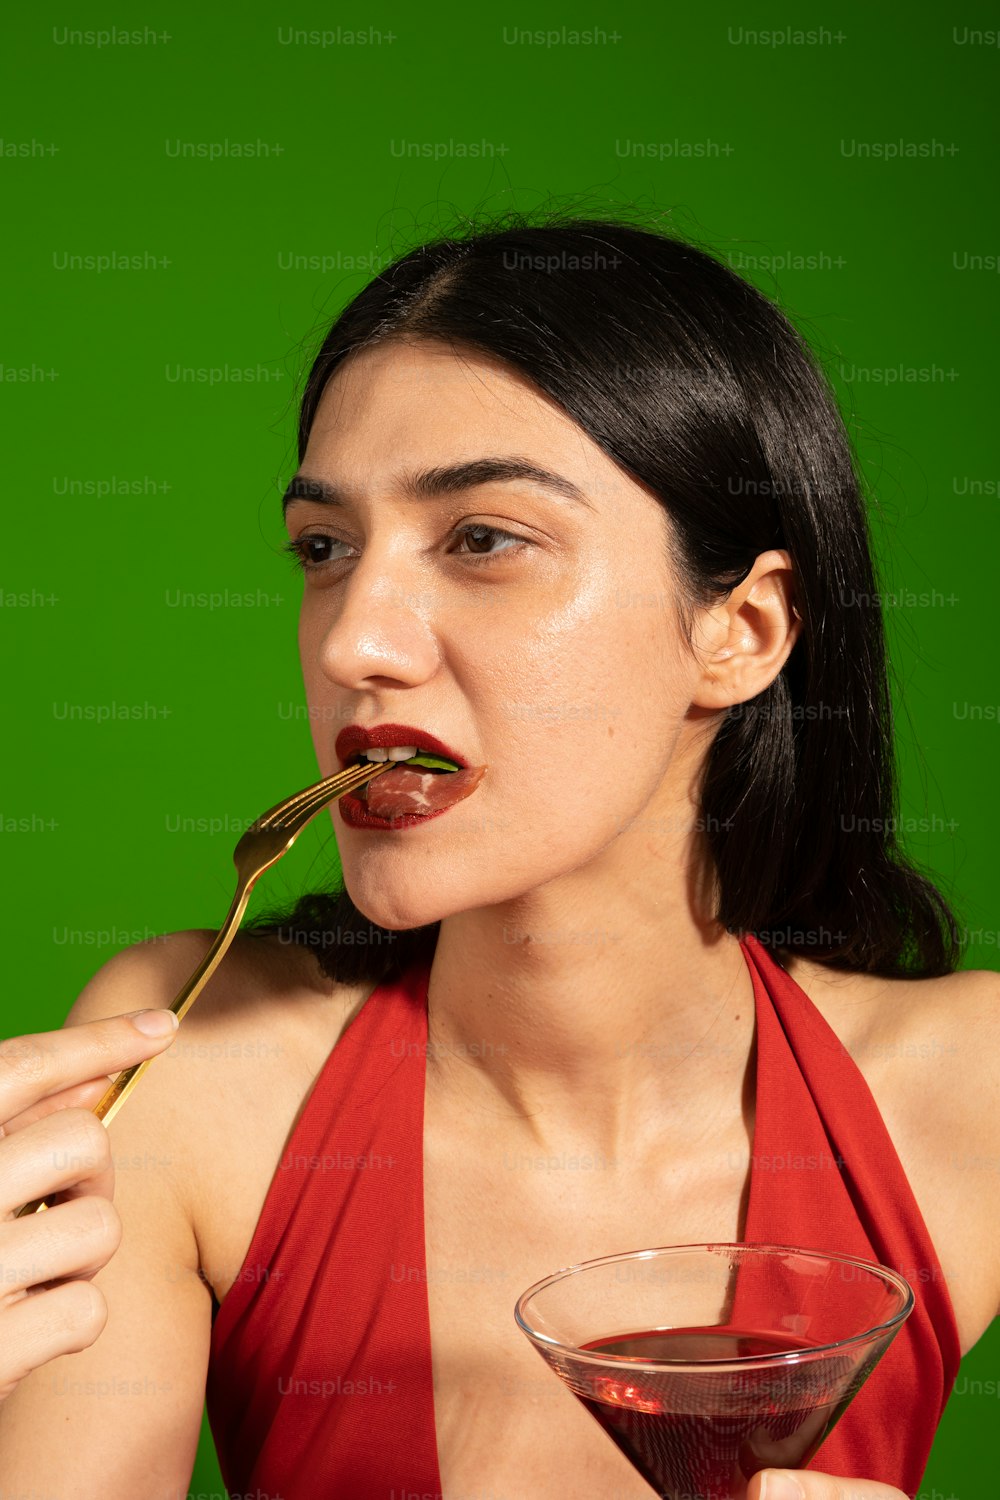 a woman in a red dress holding a spoon in her mouth